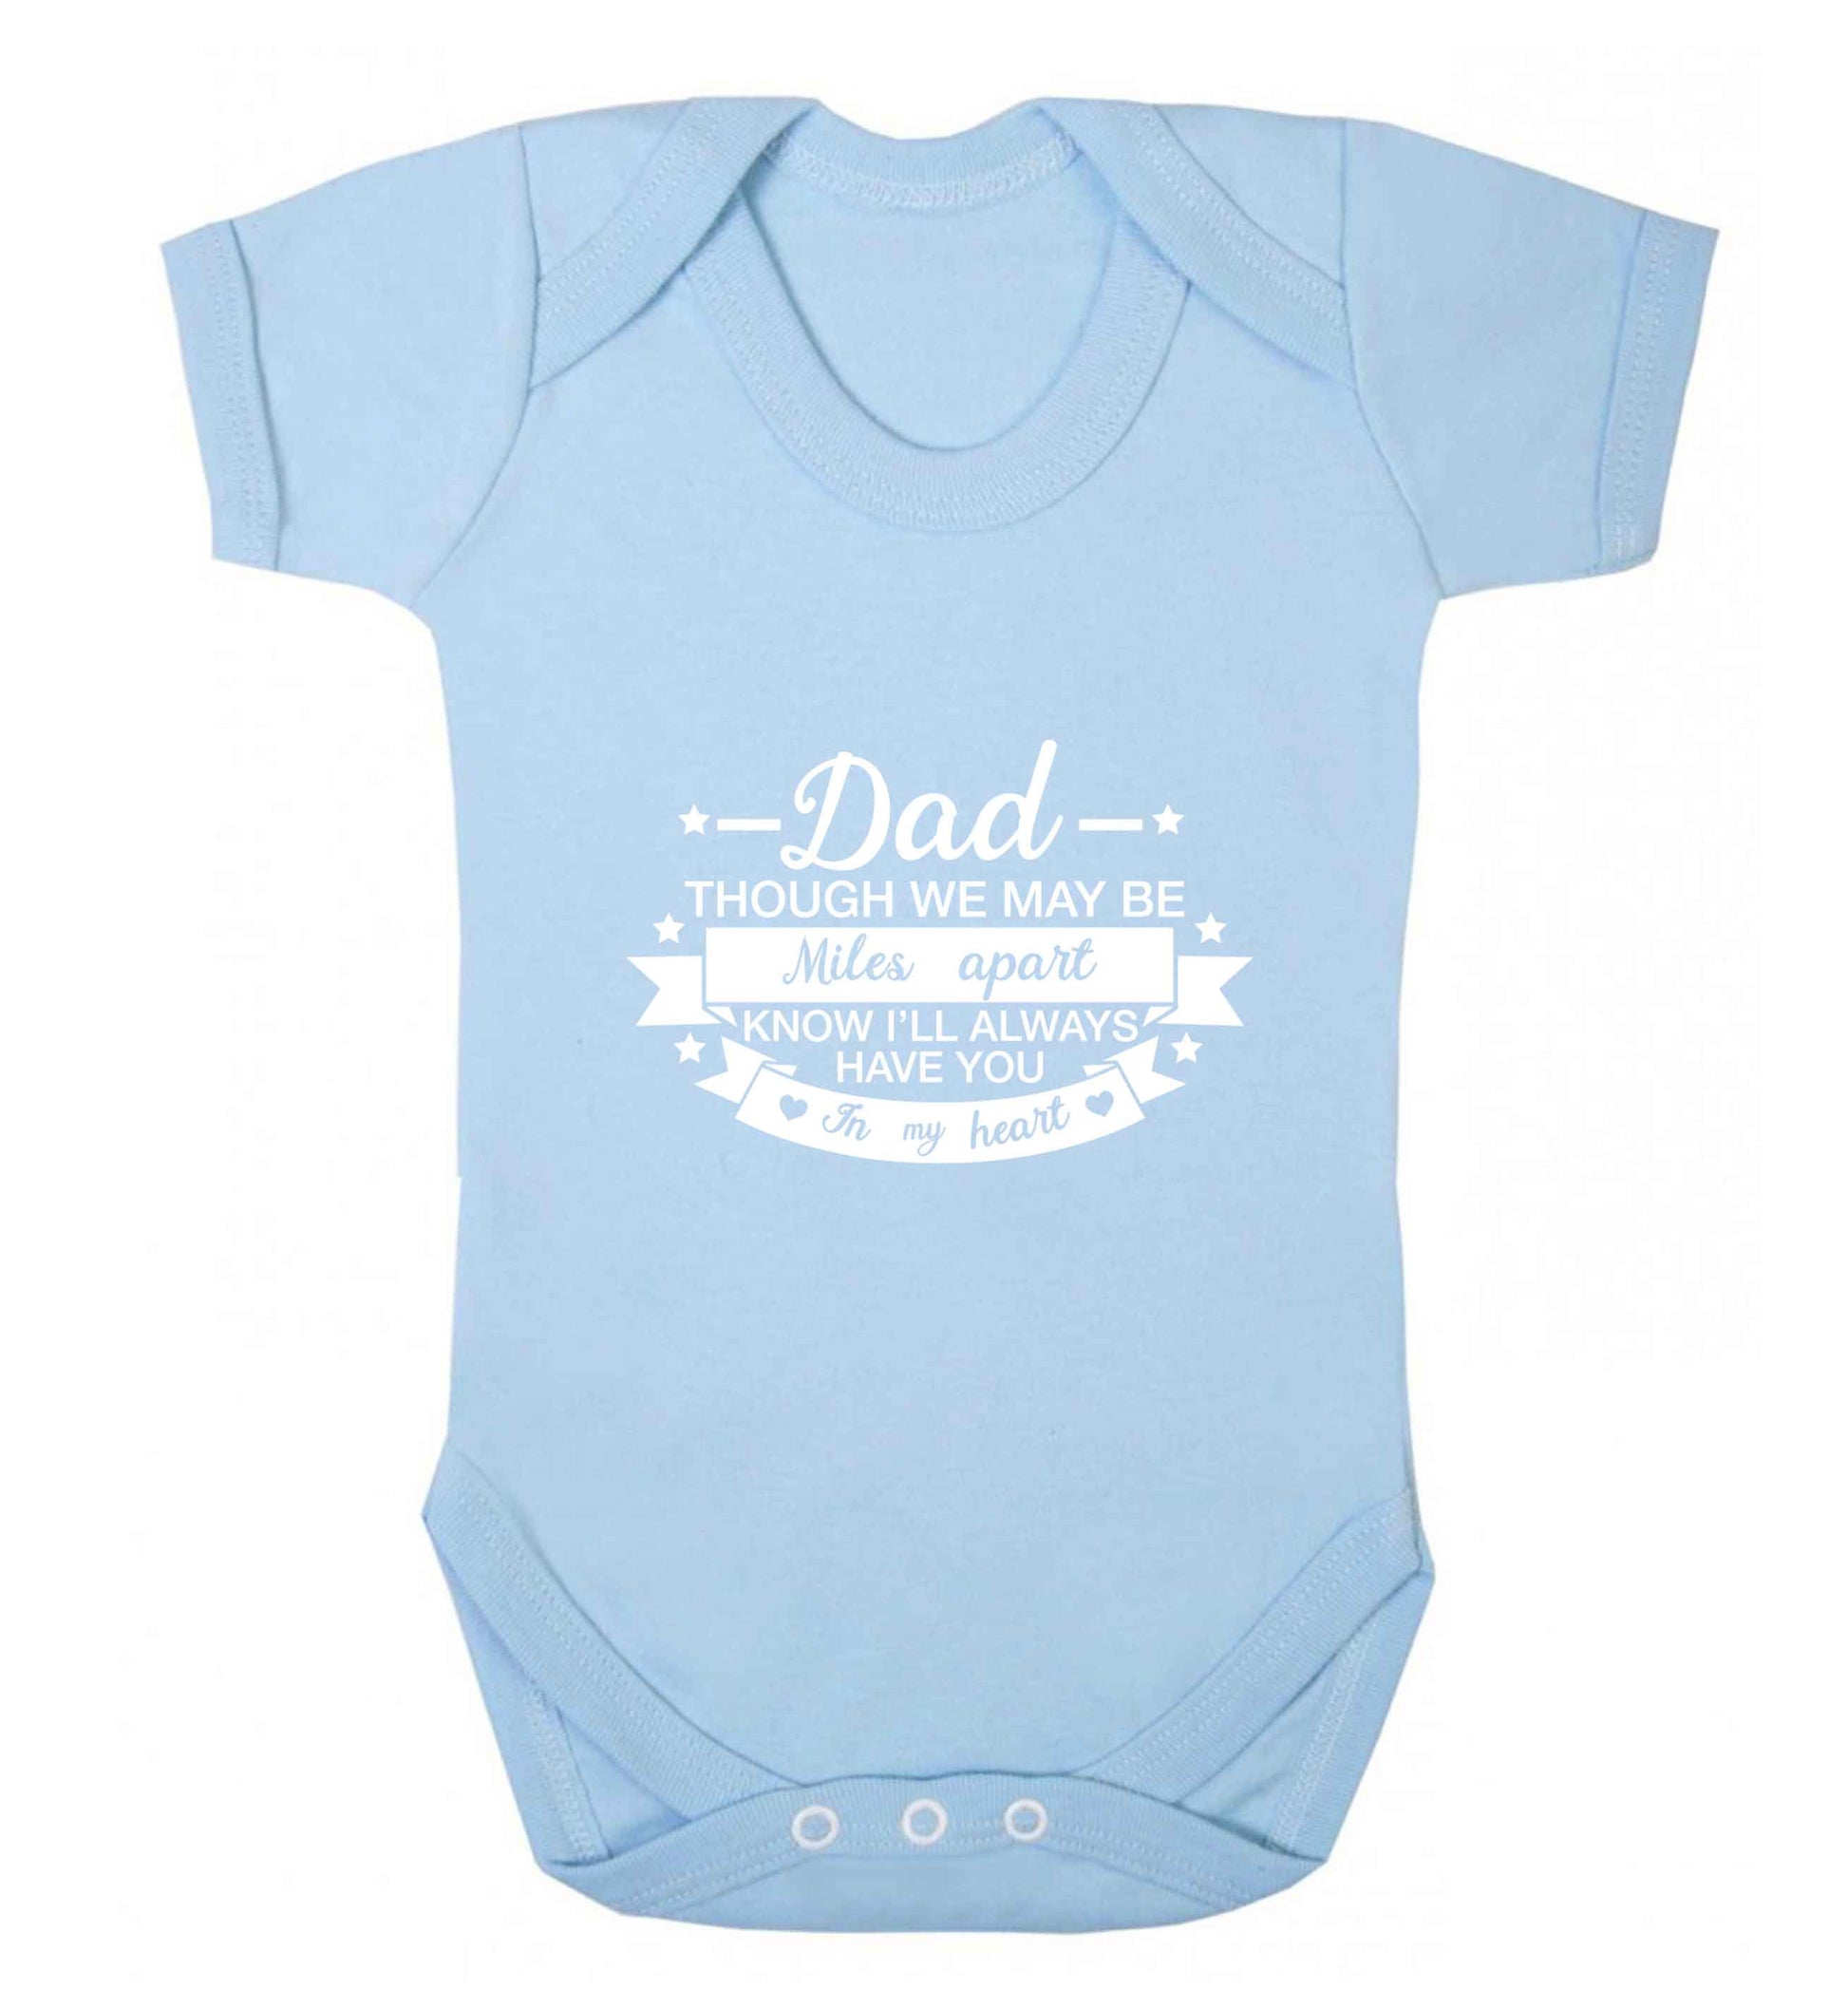 Dad though we are miles apart know I'll always have you in my heart baby vest pale blue 18-24 months